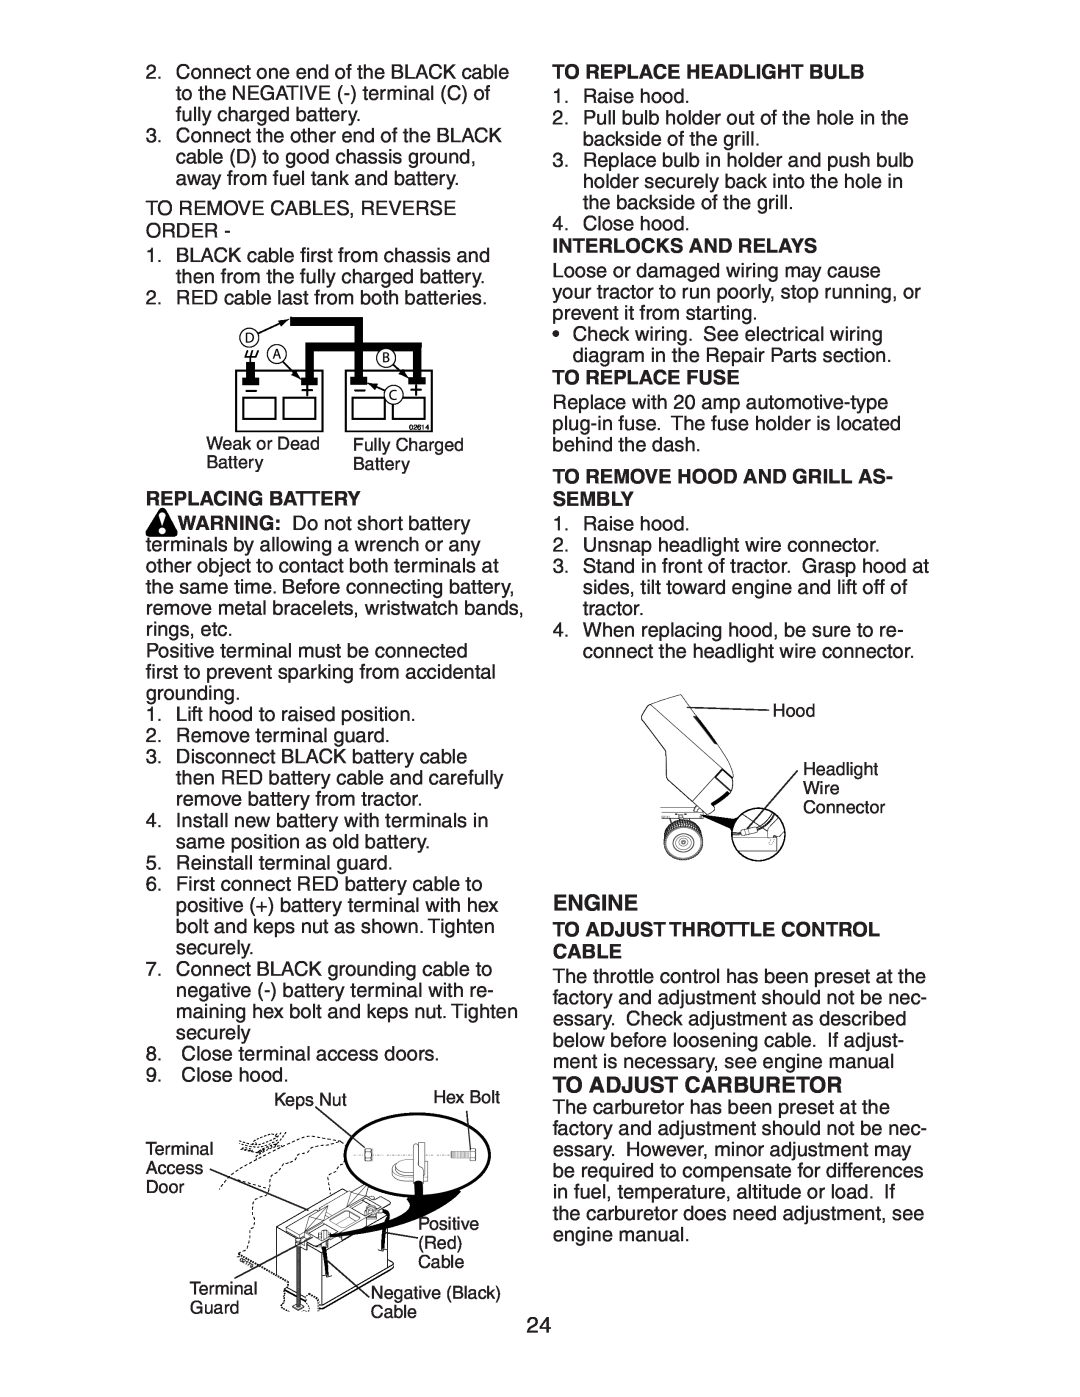 Poulan CO18542STB manual To Replace Headlight Bulb, Interlocks And Relays, Replacing Battery, To Replace Fuse 